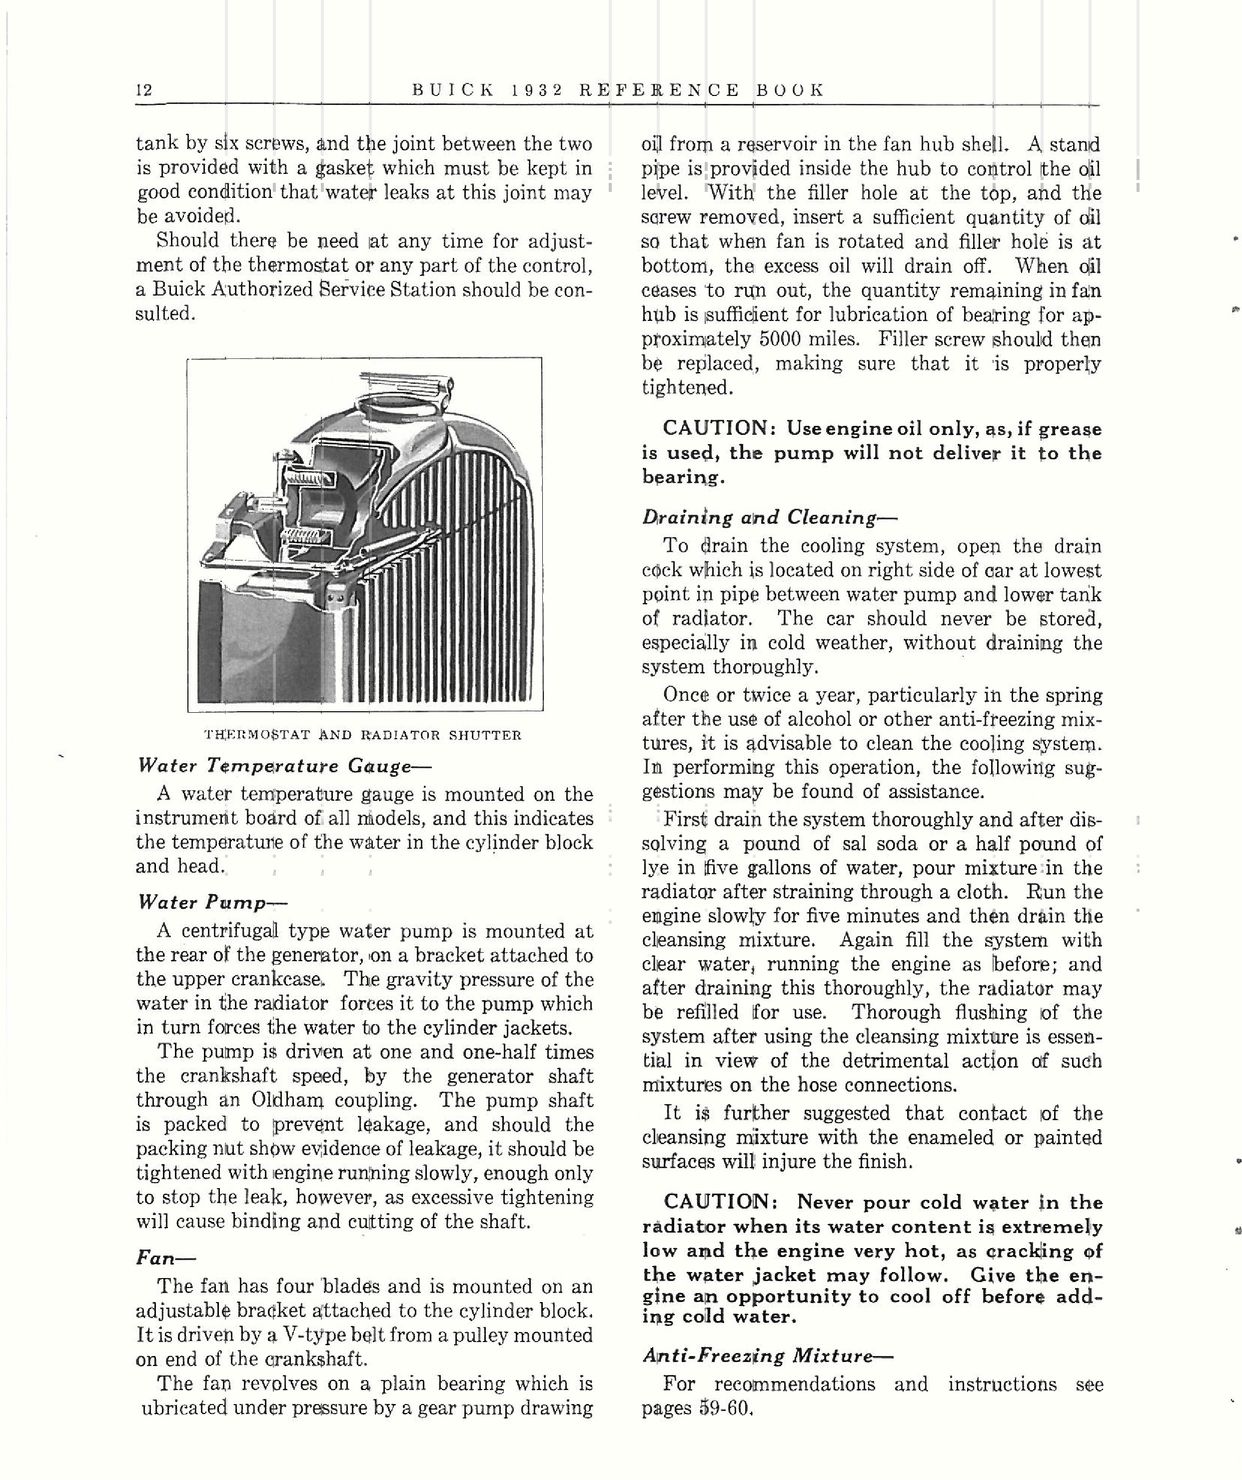 1932 Buick Reference Book-12